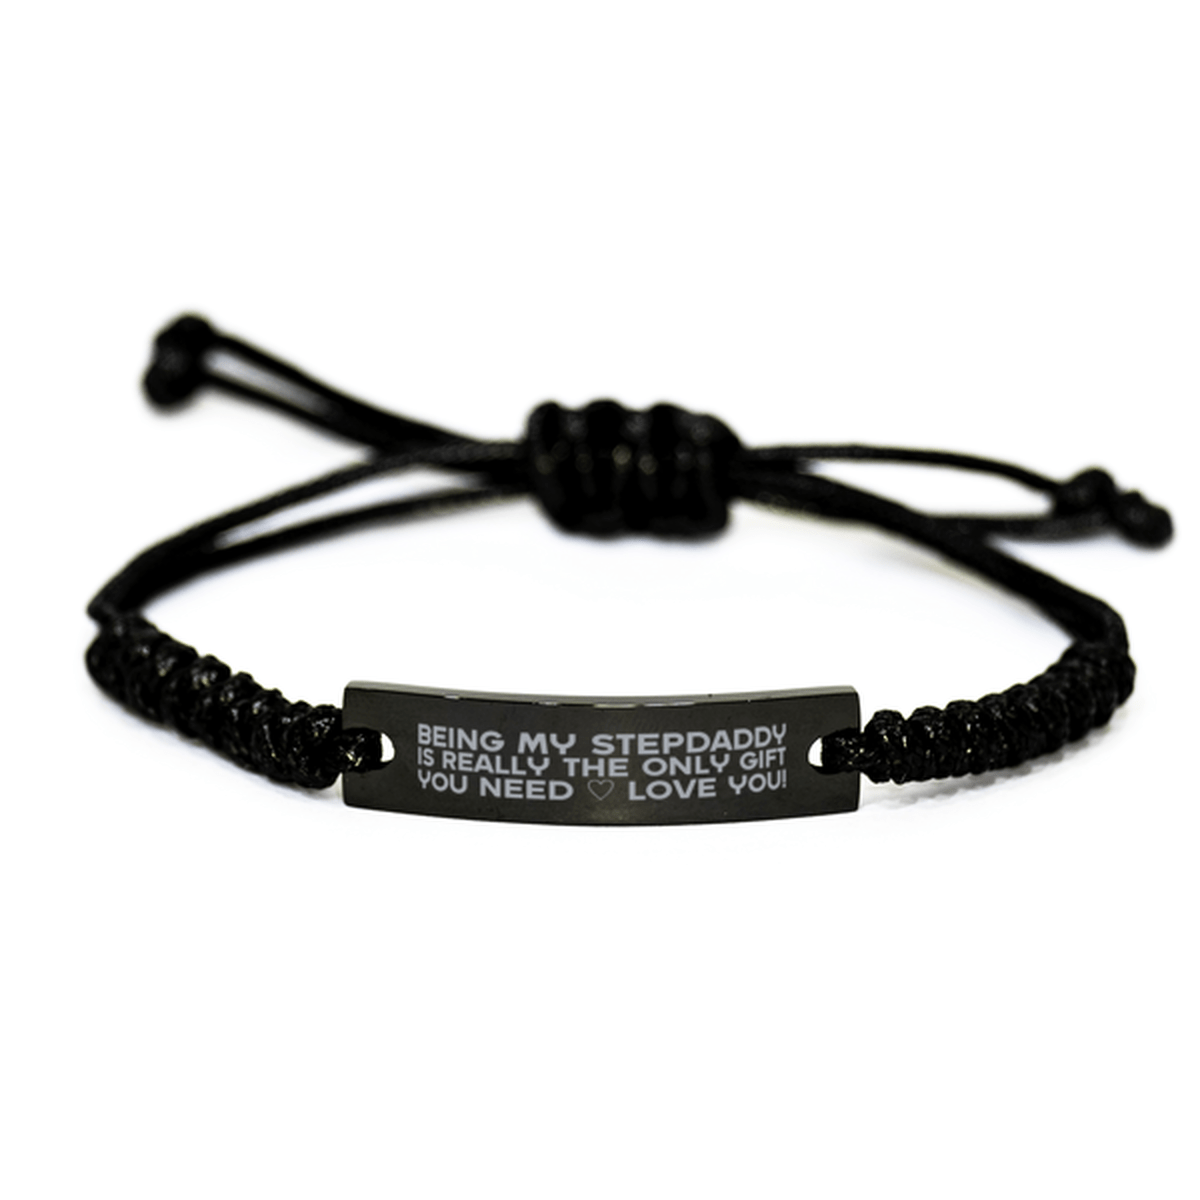 Funny Stepdaddy Engraved Rope Bracelet, Being My Stepdaddy Is Really the Only Gift You Need, Best Birthday Gifts for Stepdaddy